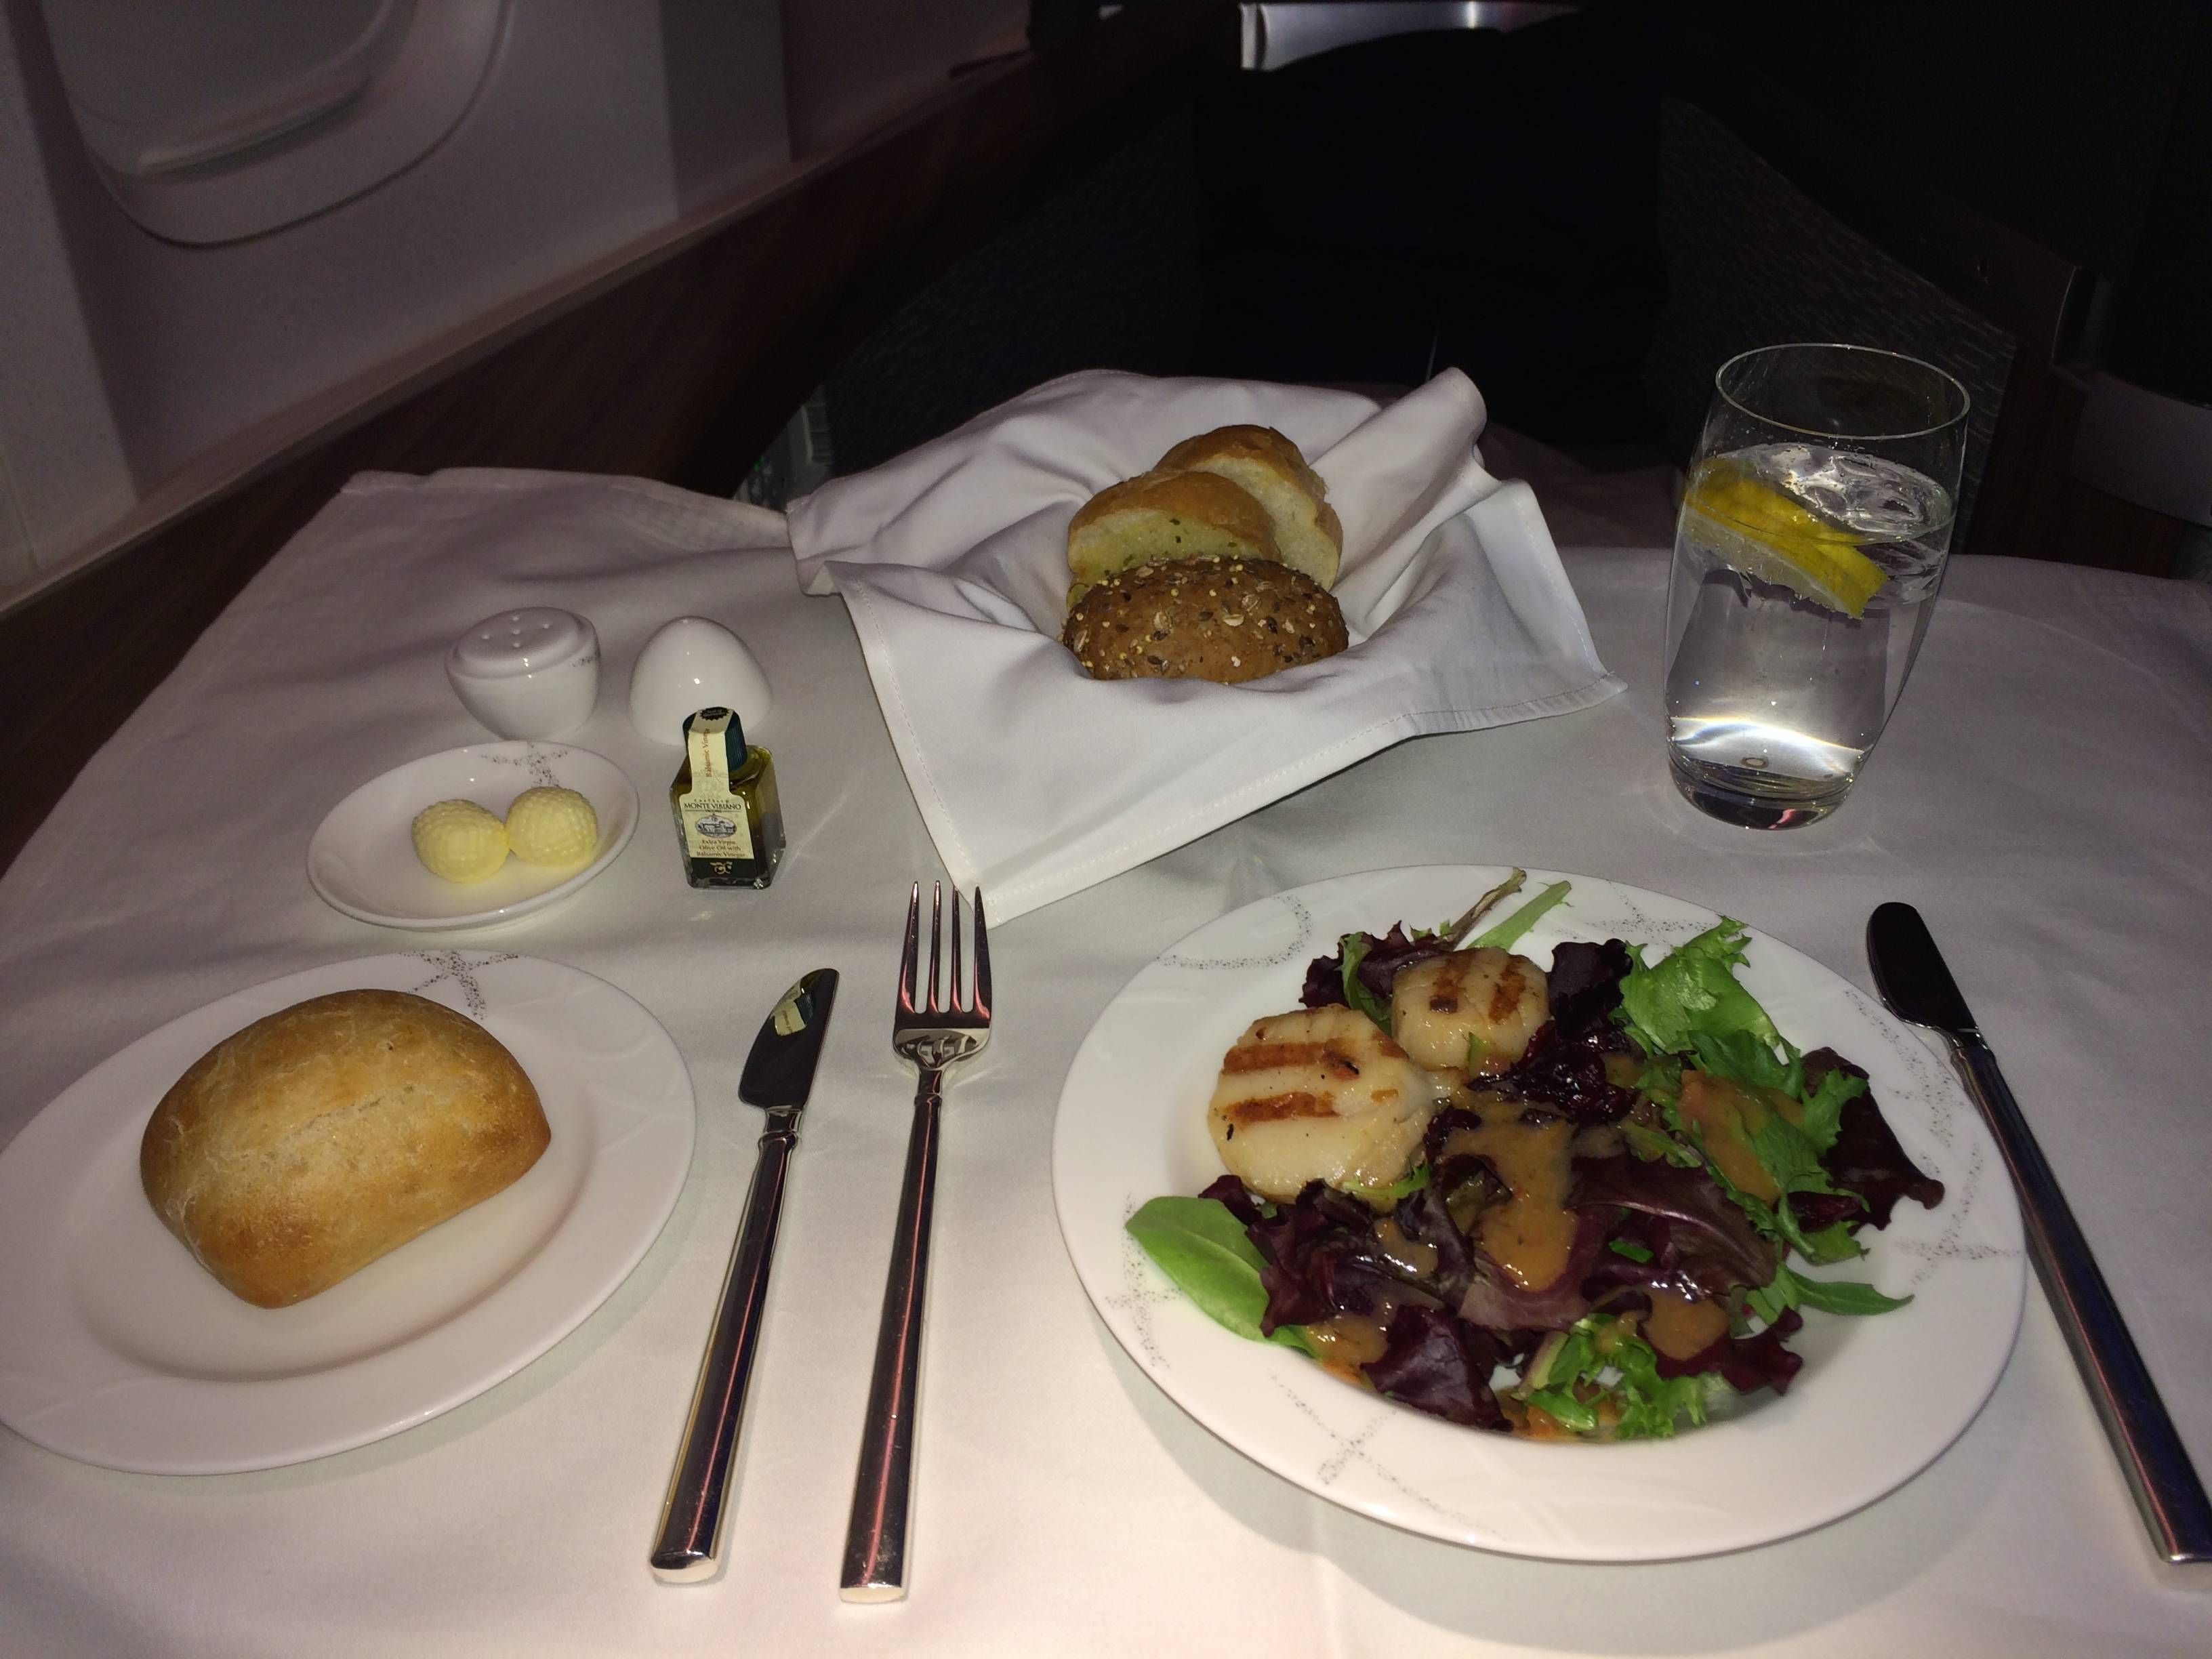 cathay pacific first class b777-300er primeira classe